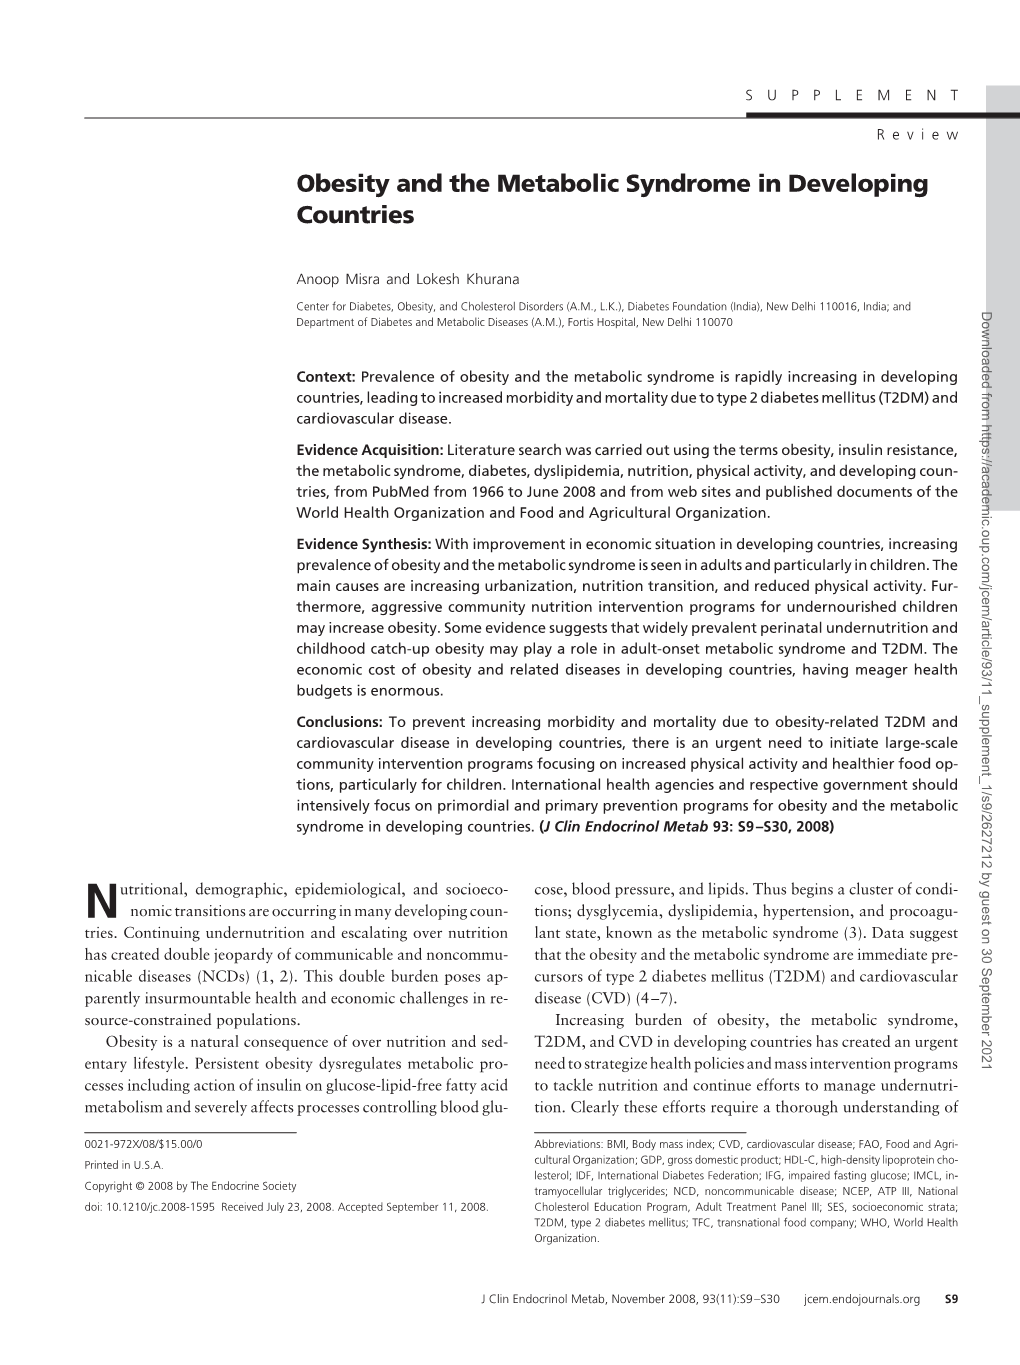 Obesity and the Metabolic Syndrome in Developing Countries